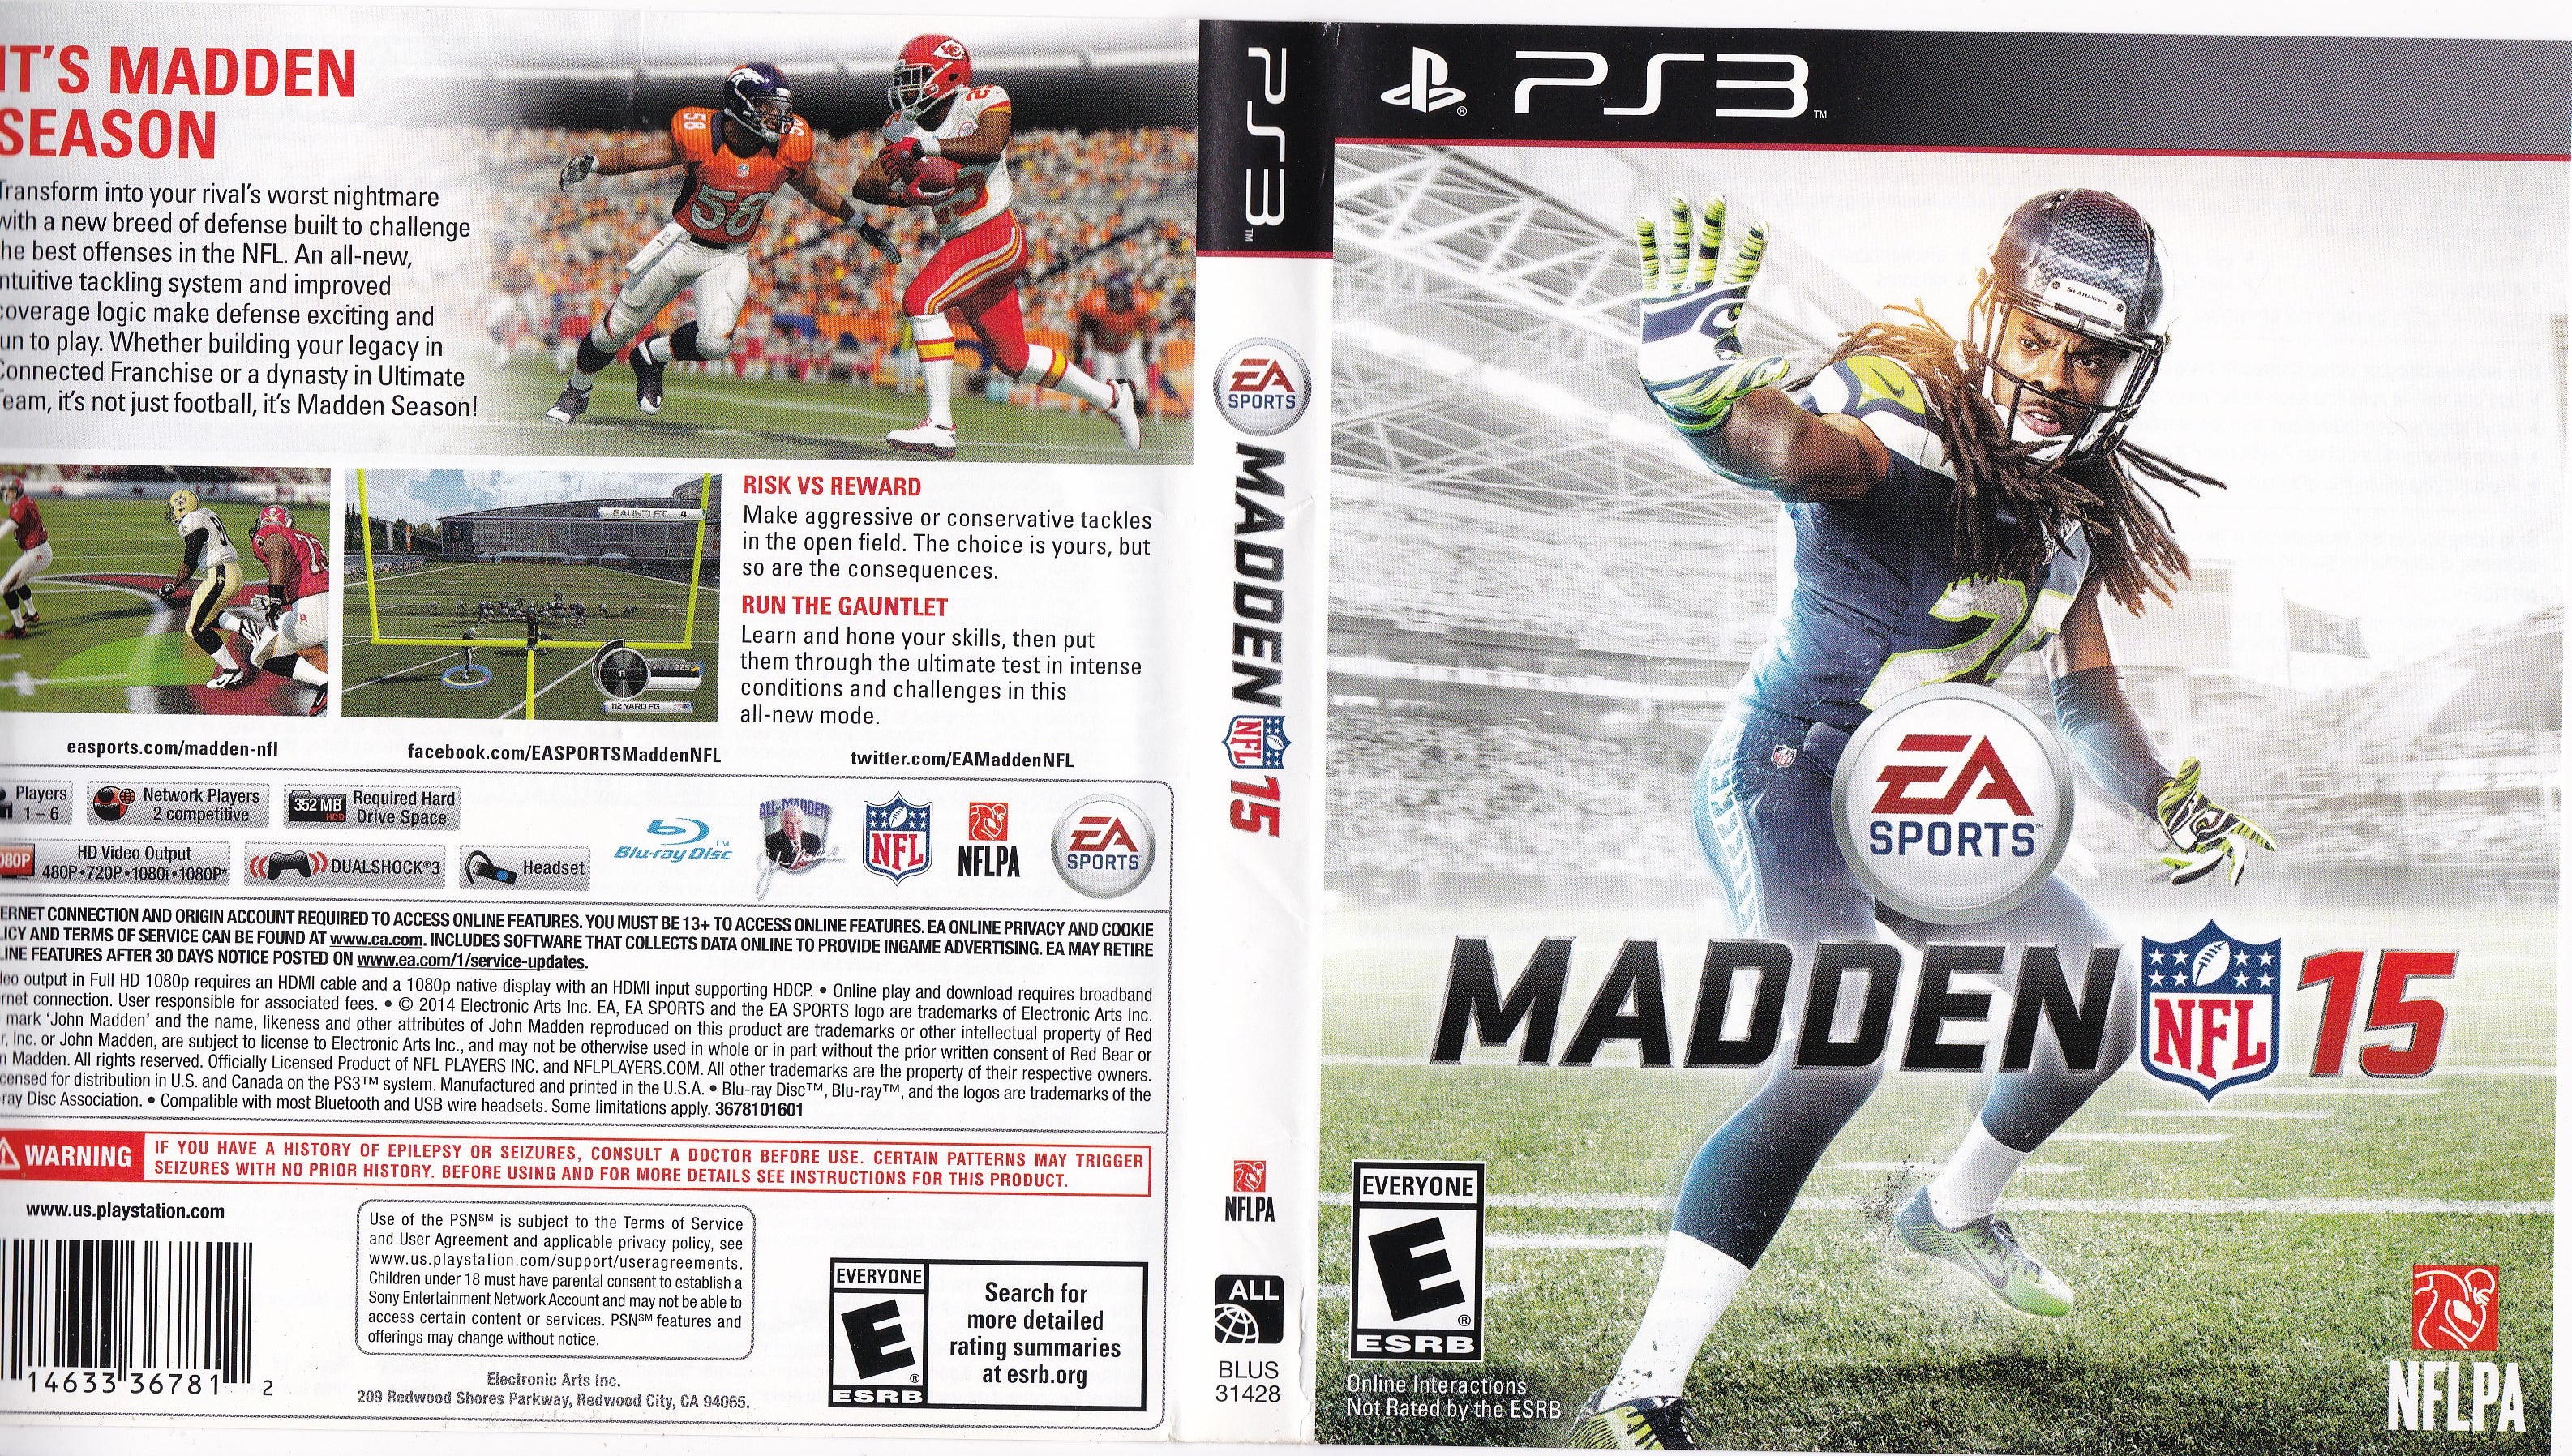 : Madden NFL 15 (Ultimate Edition) - PlayStation 3 : Video Games